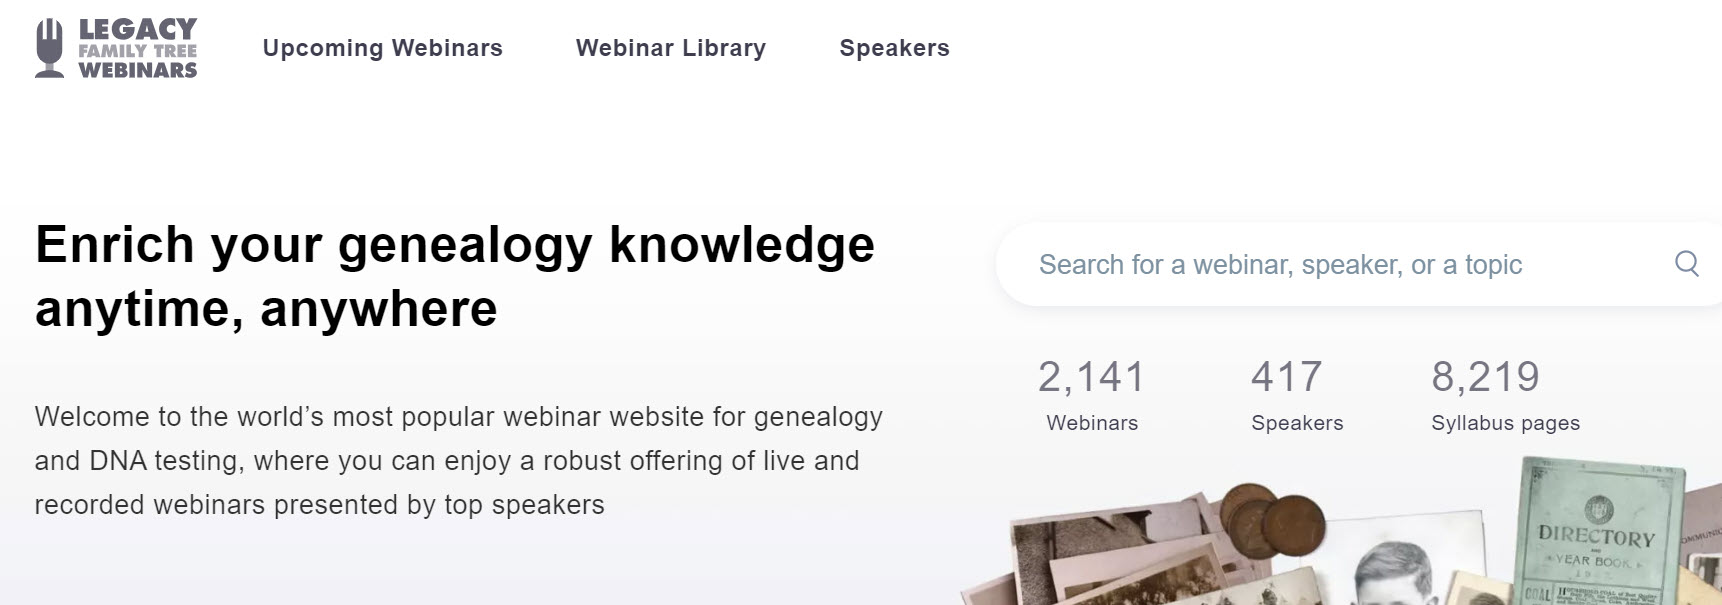 FREE Genealogy Webinars from Legacy Family Tree and More!